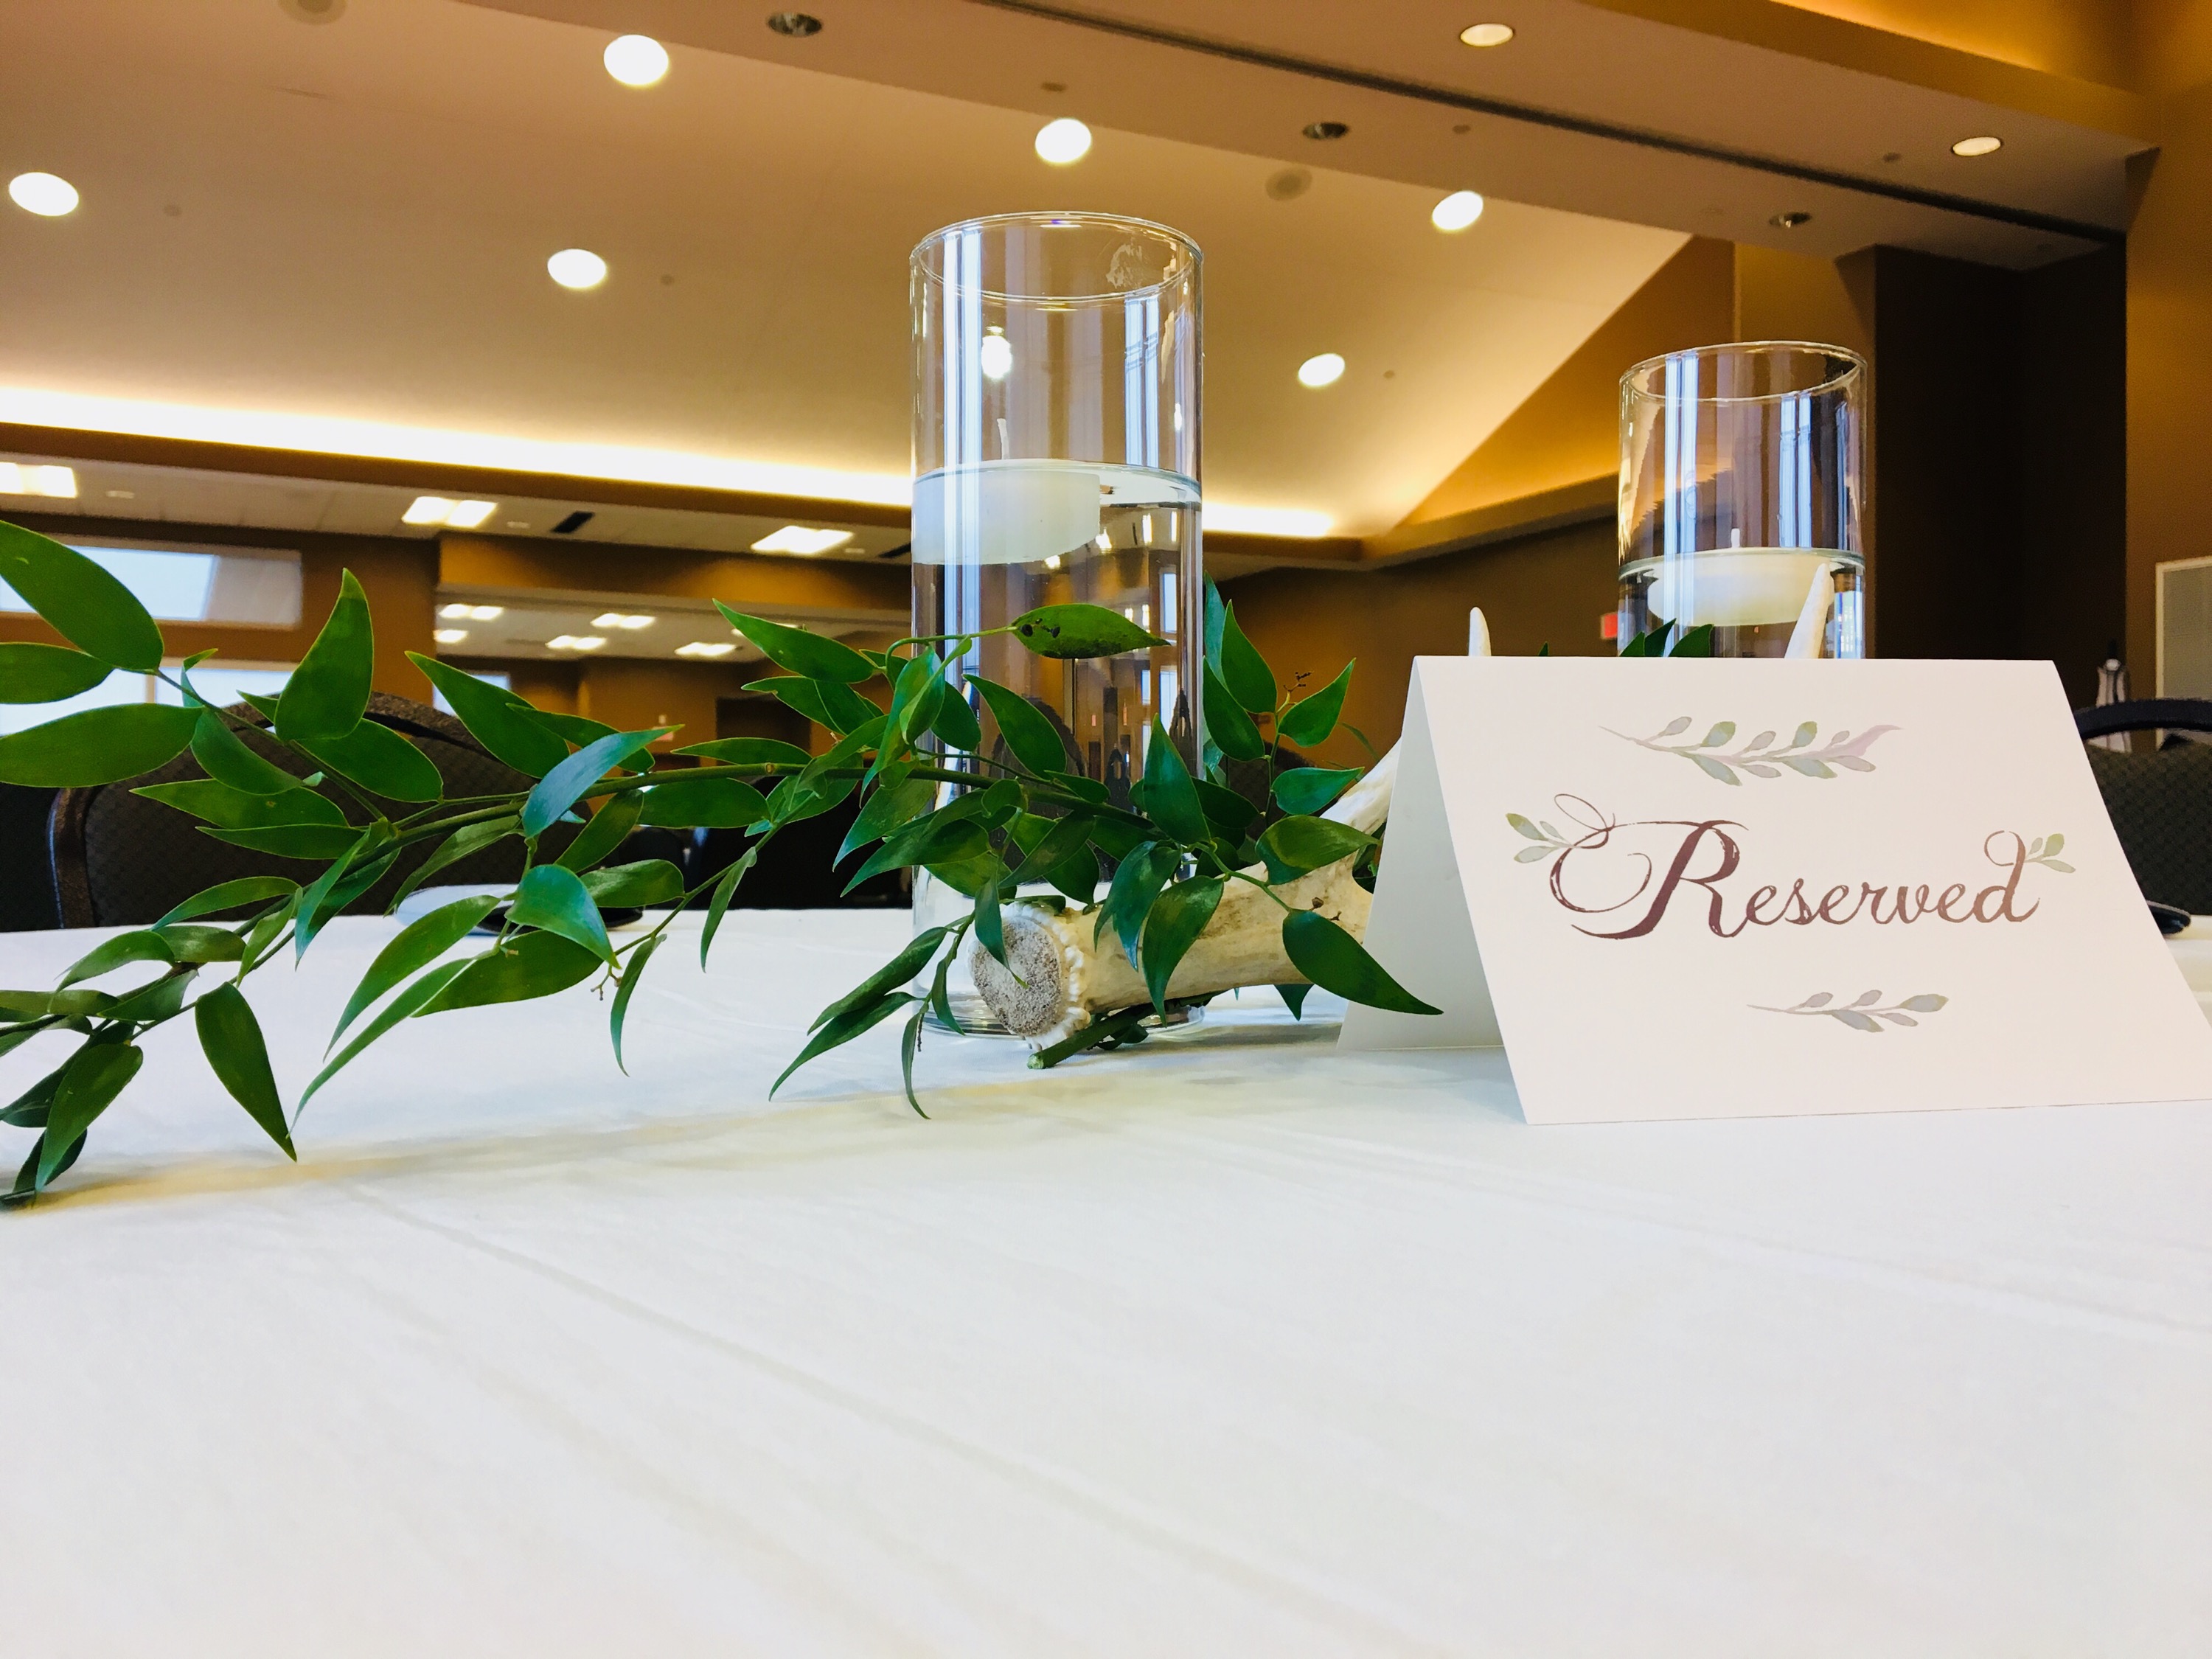 Reserved table sign and centerpiece